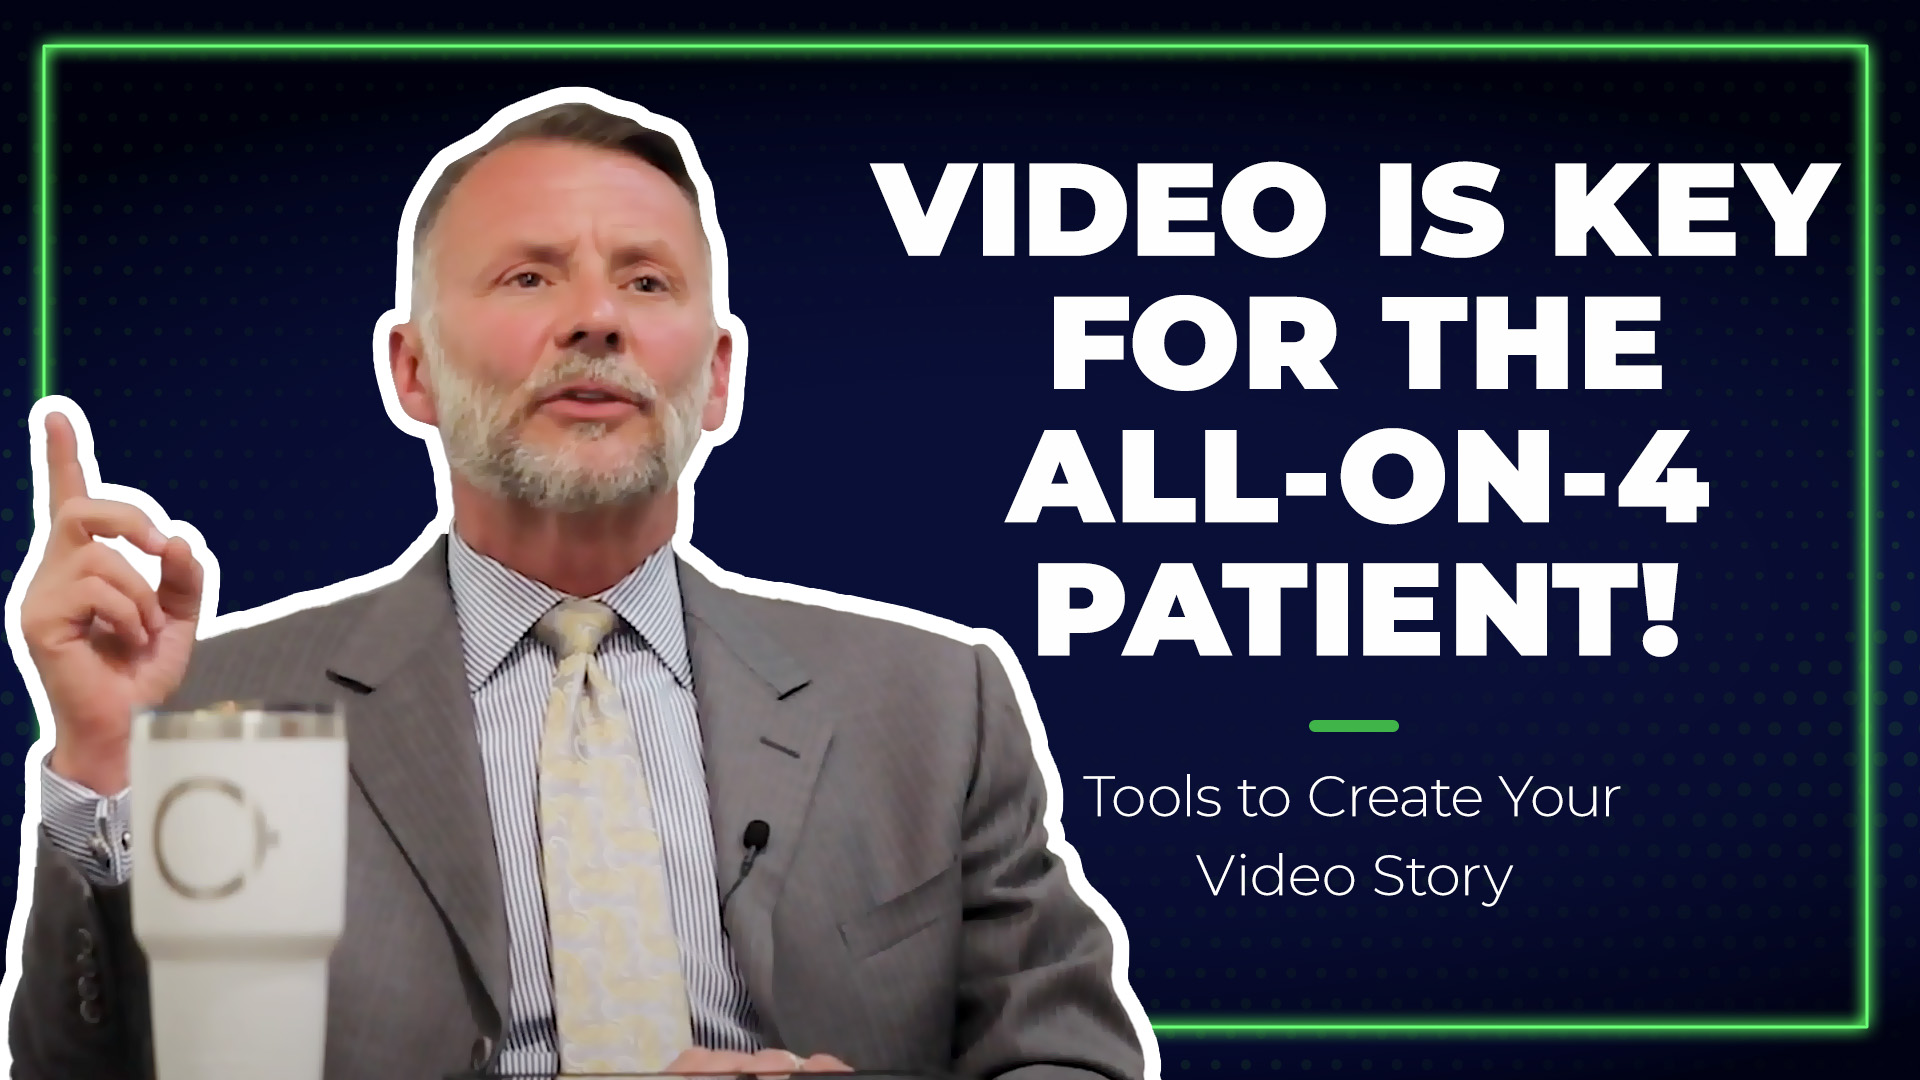 Tools to grow your practice | Video Is The Key for the All-On-4 Patient